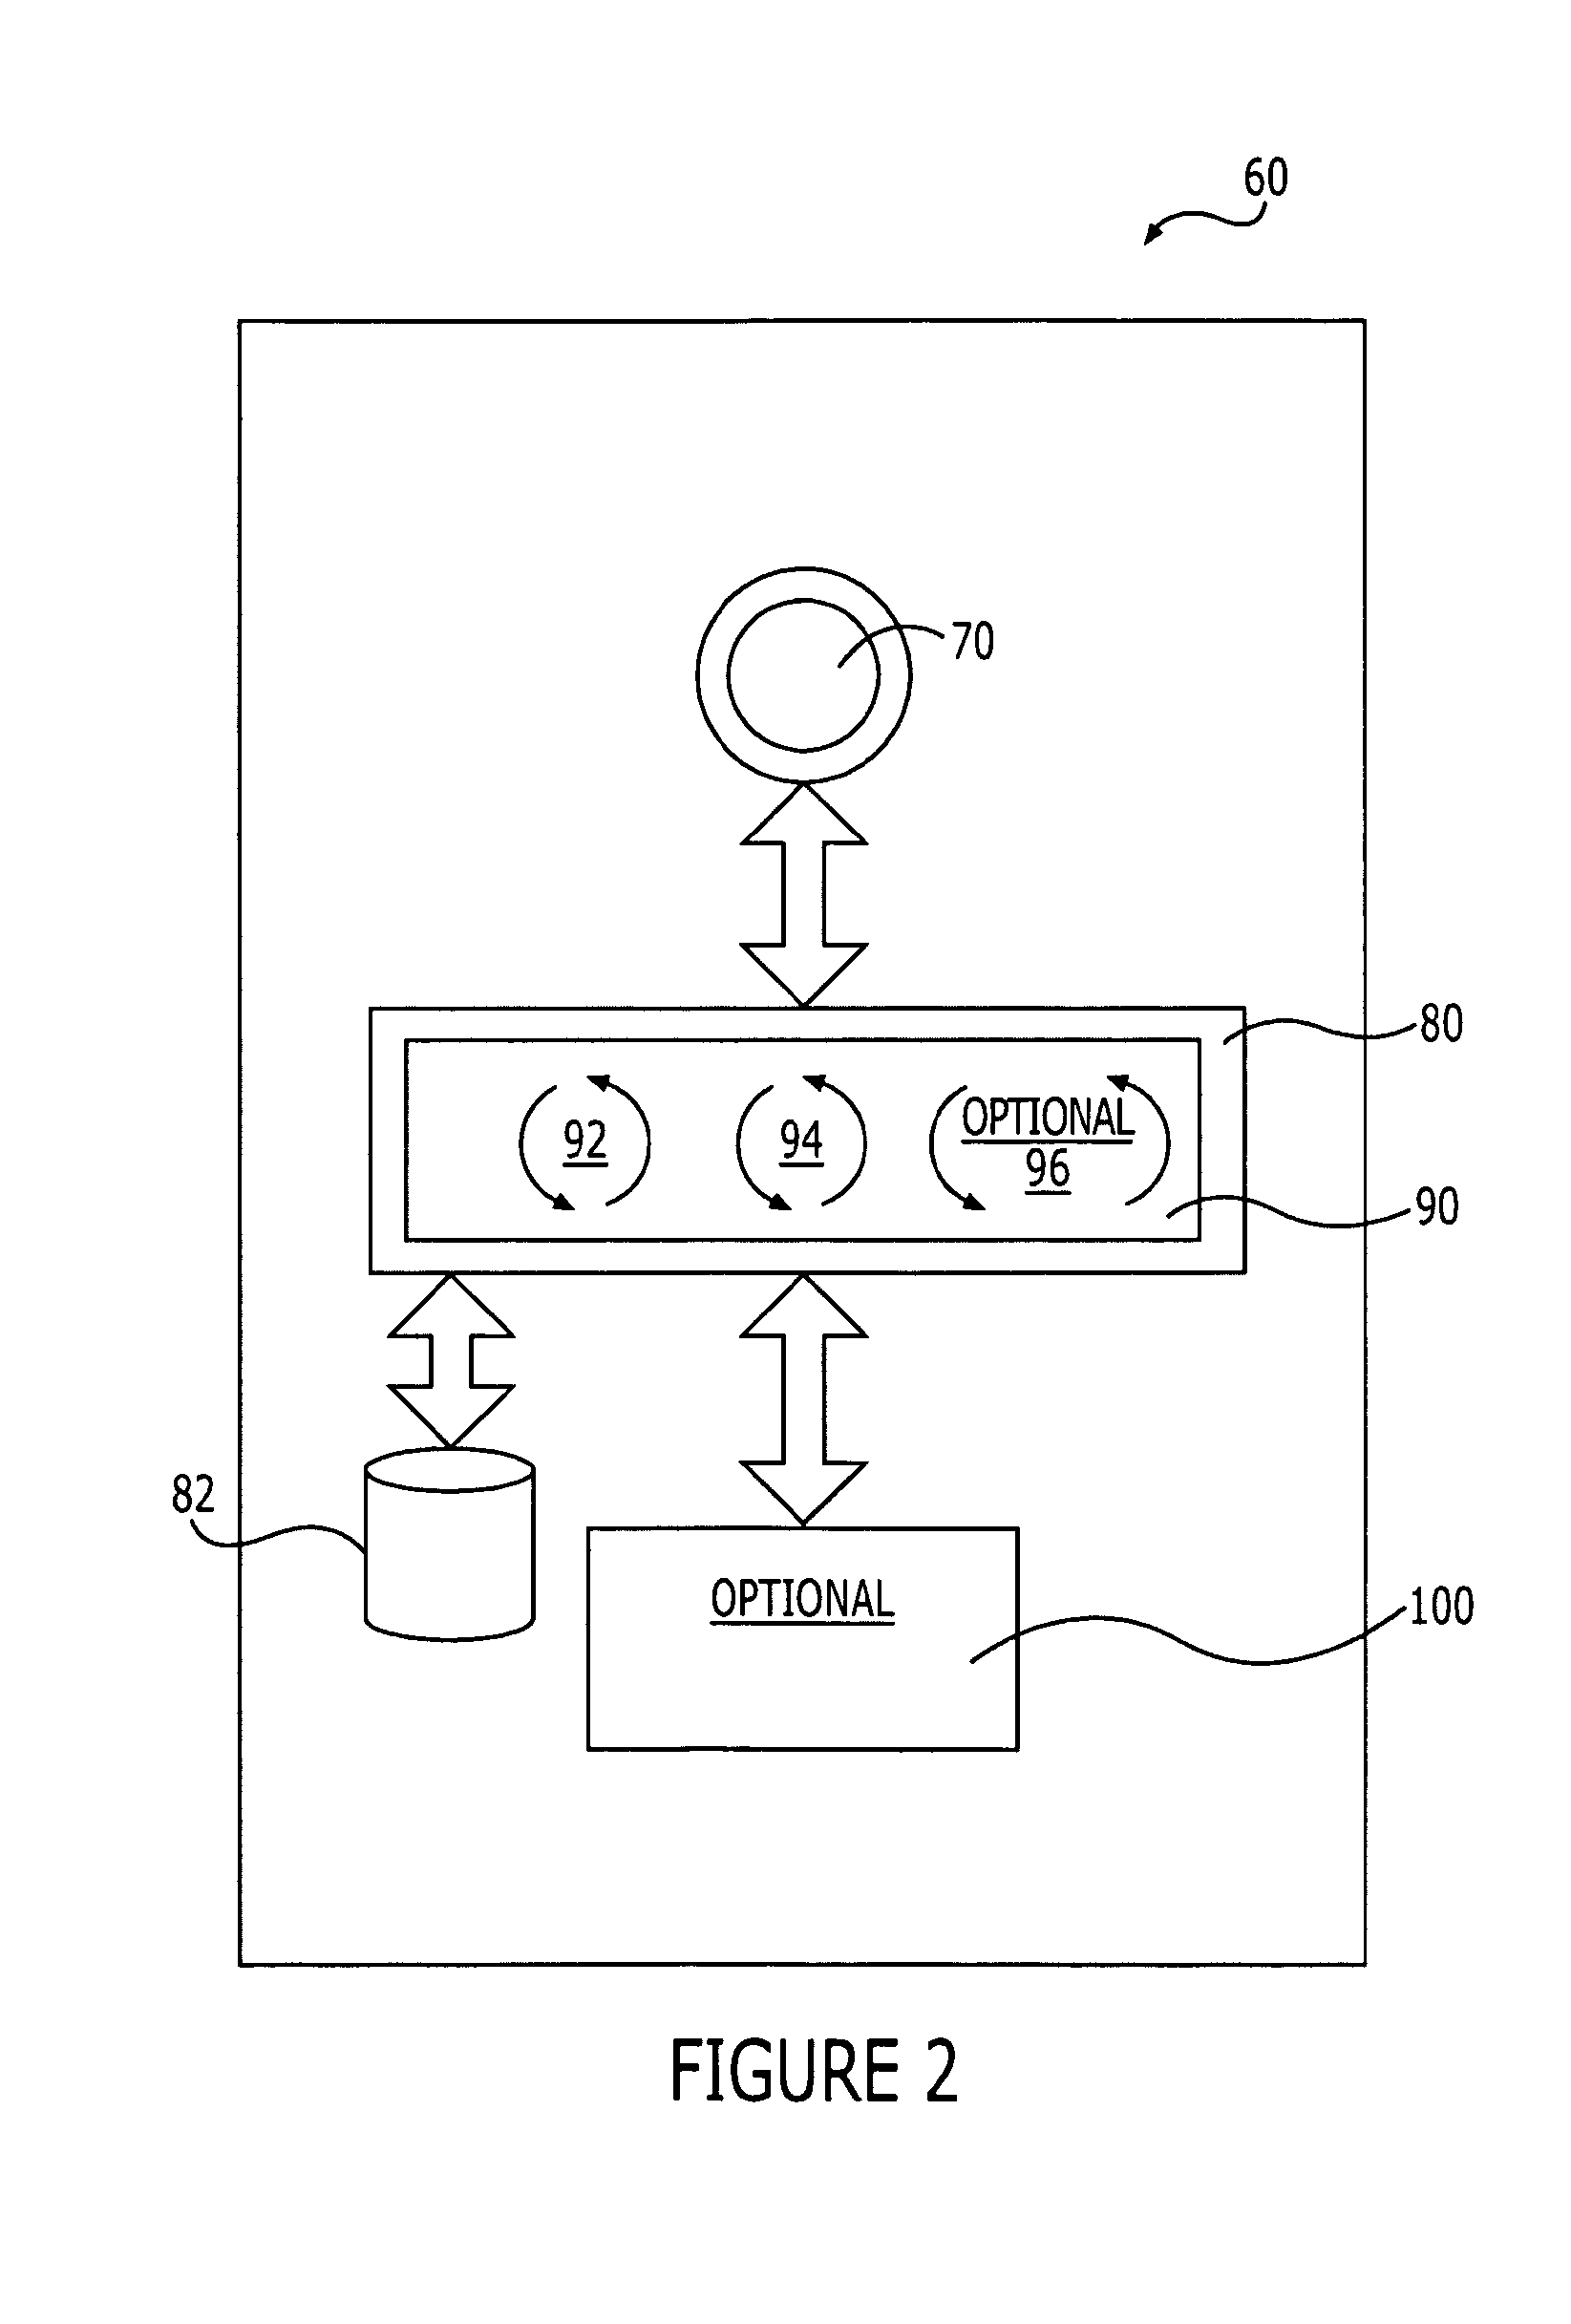 Methods, devices and computer program products for generating, displaying and capturing a series of images of visually encoded data